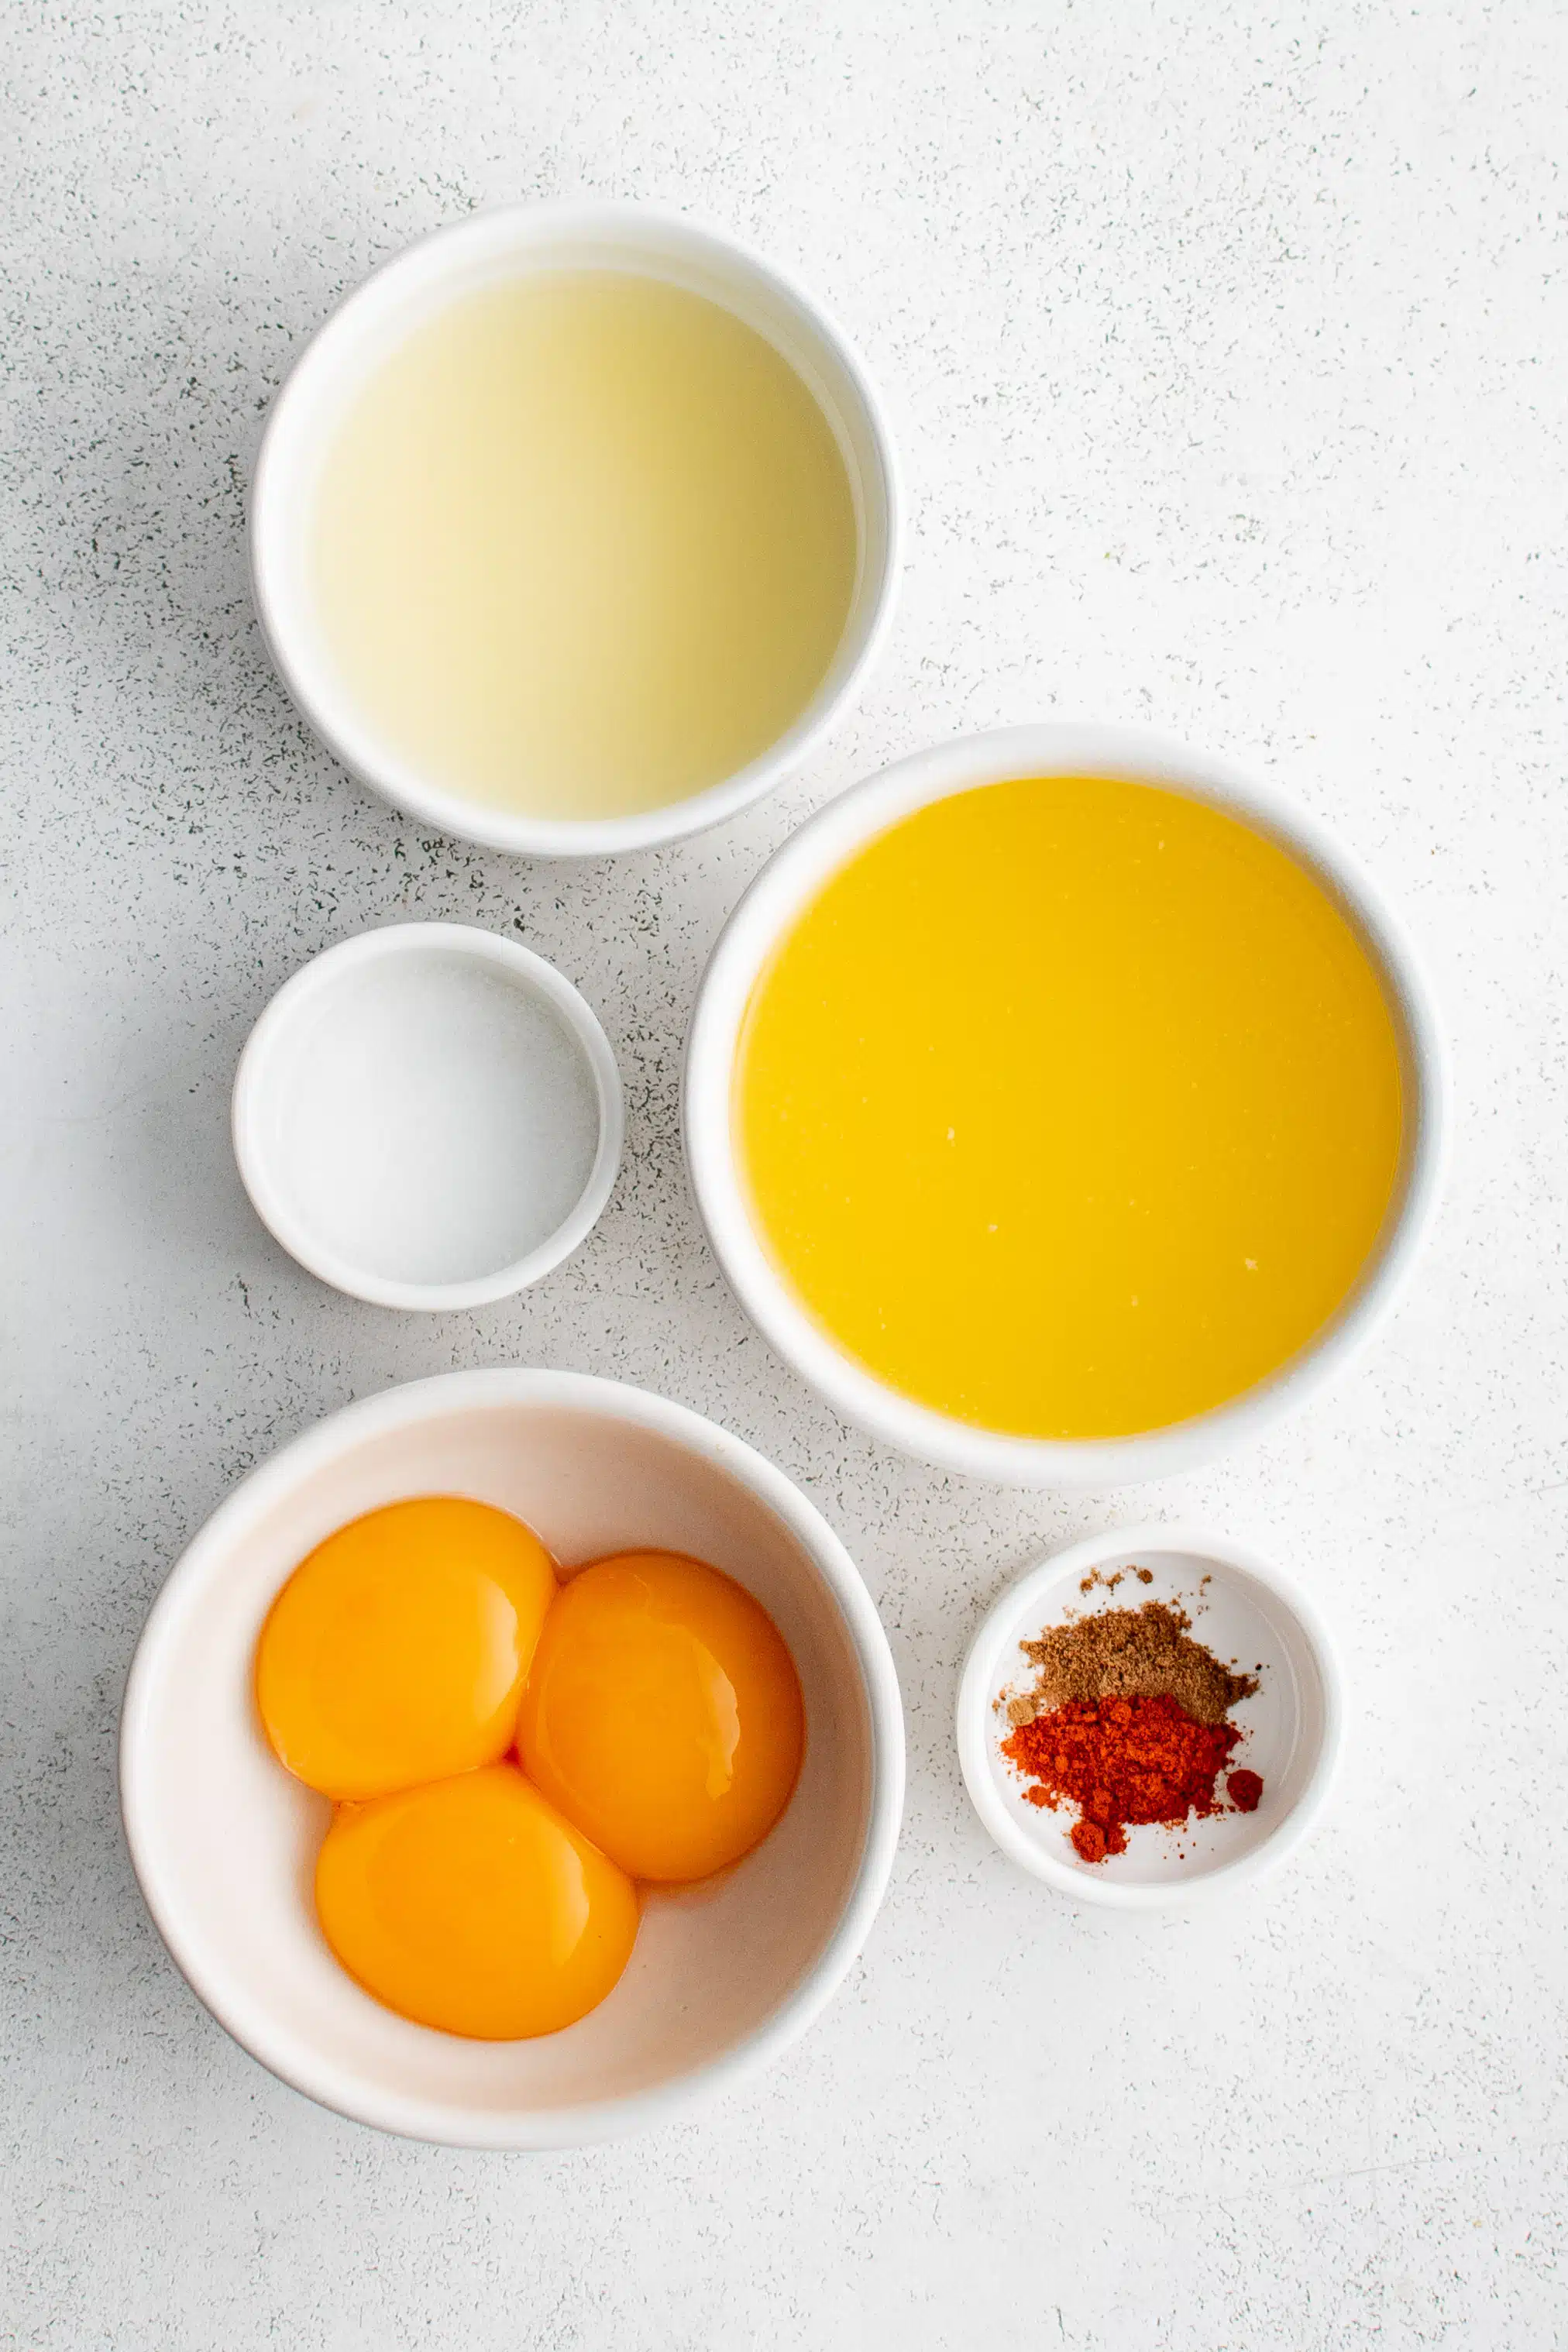 Ingredients for Hollandaise Sauce in individual measuring cups and ramekins.